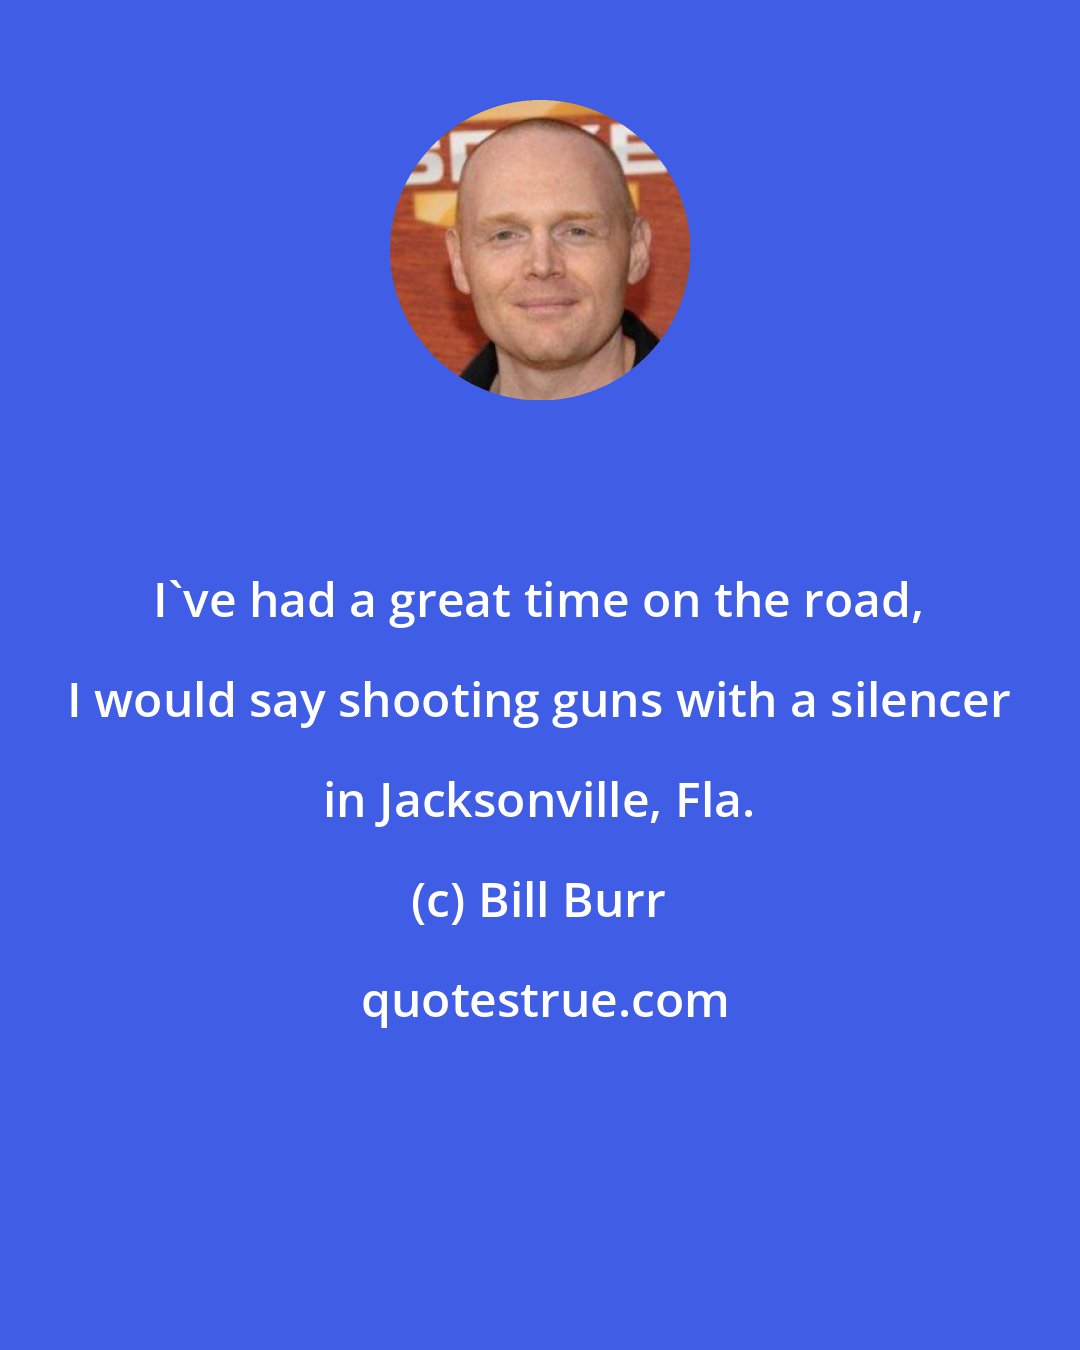 Bill Burr: I've had a great time on the road, I would say shooting guns with a silencer in Jacksonville, Fla.